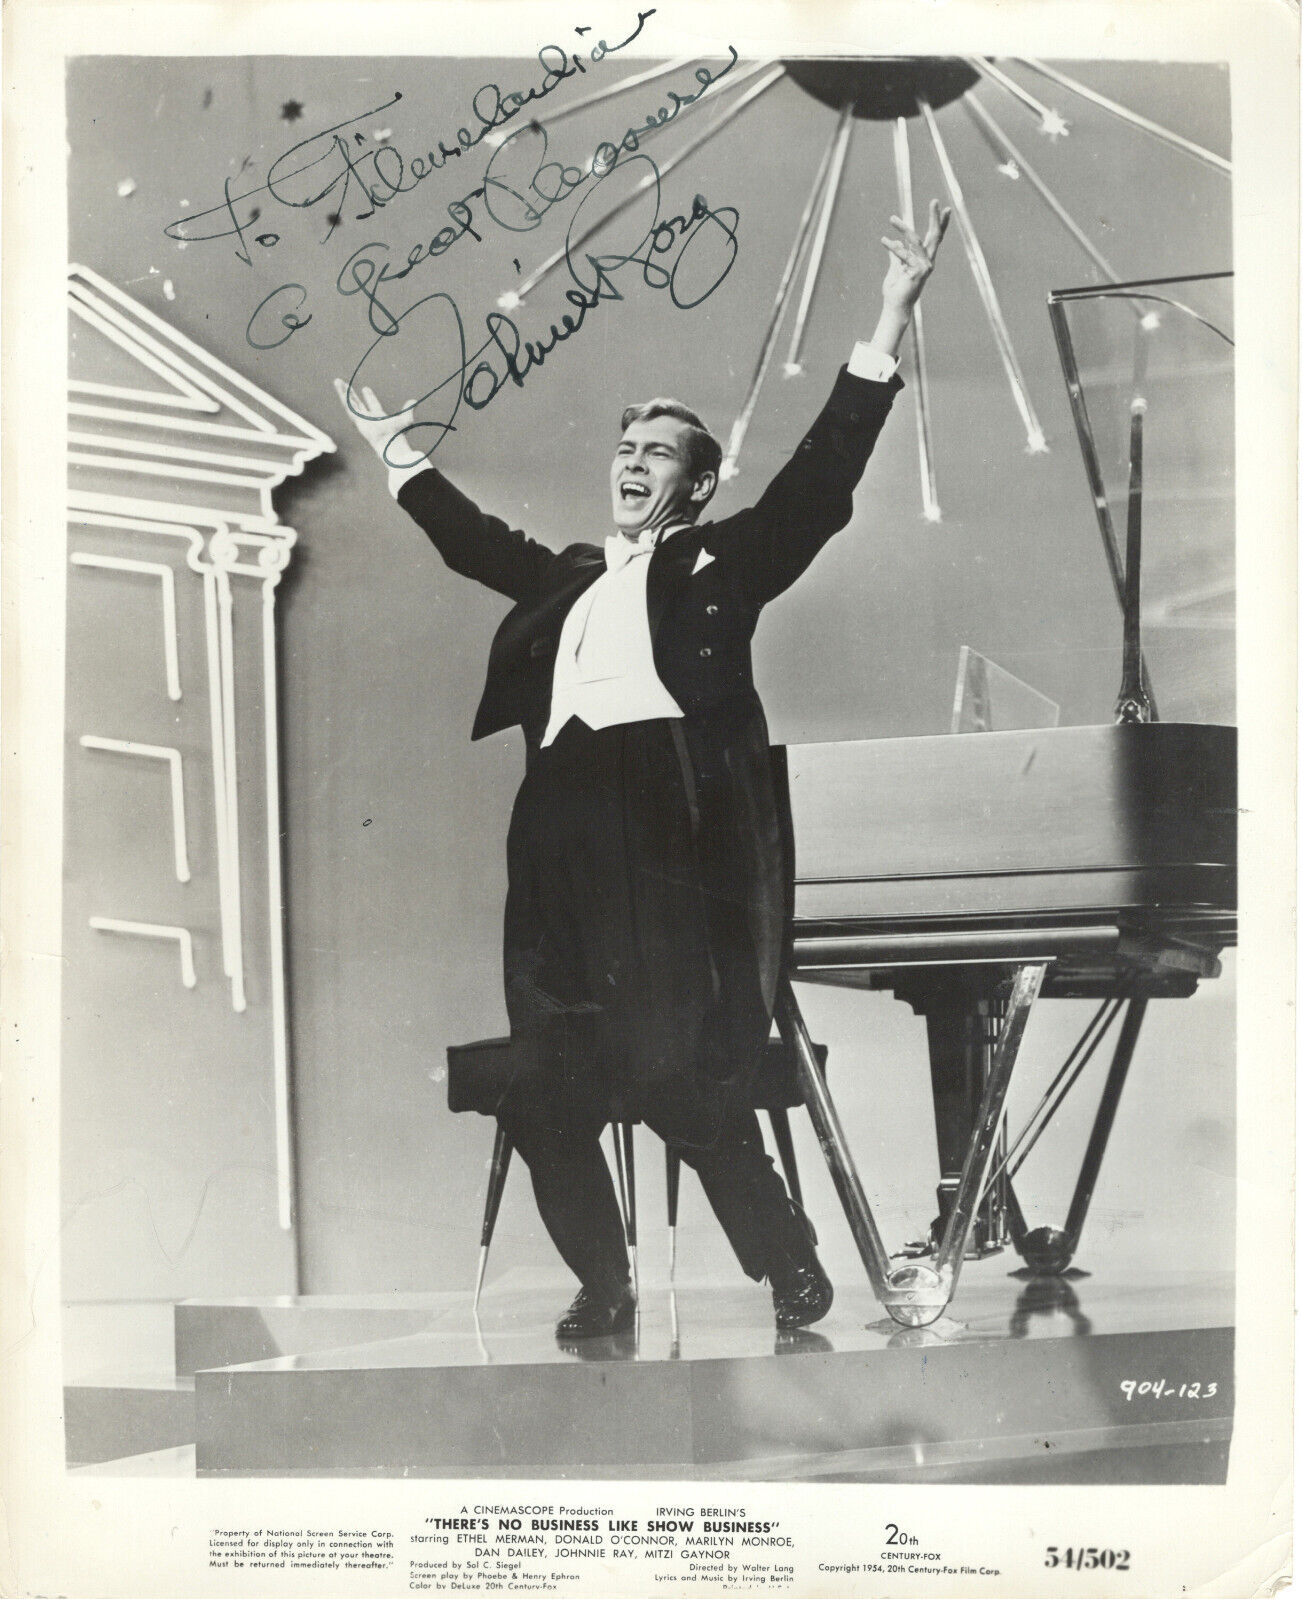 AMERICAN SINGER, ACTOR, SONGWRITER, AUTHOR JOHNNIE RAY, SIGNED VINTAGE PHOTO